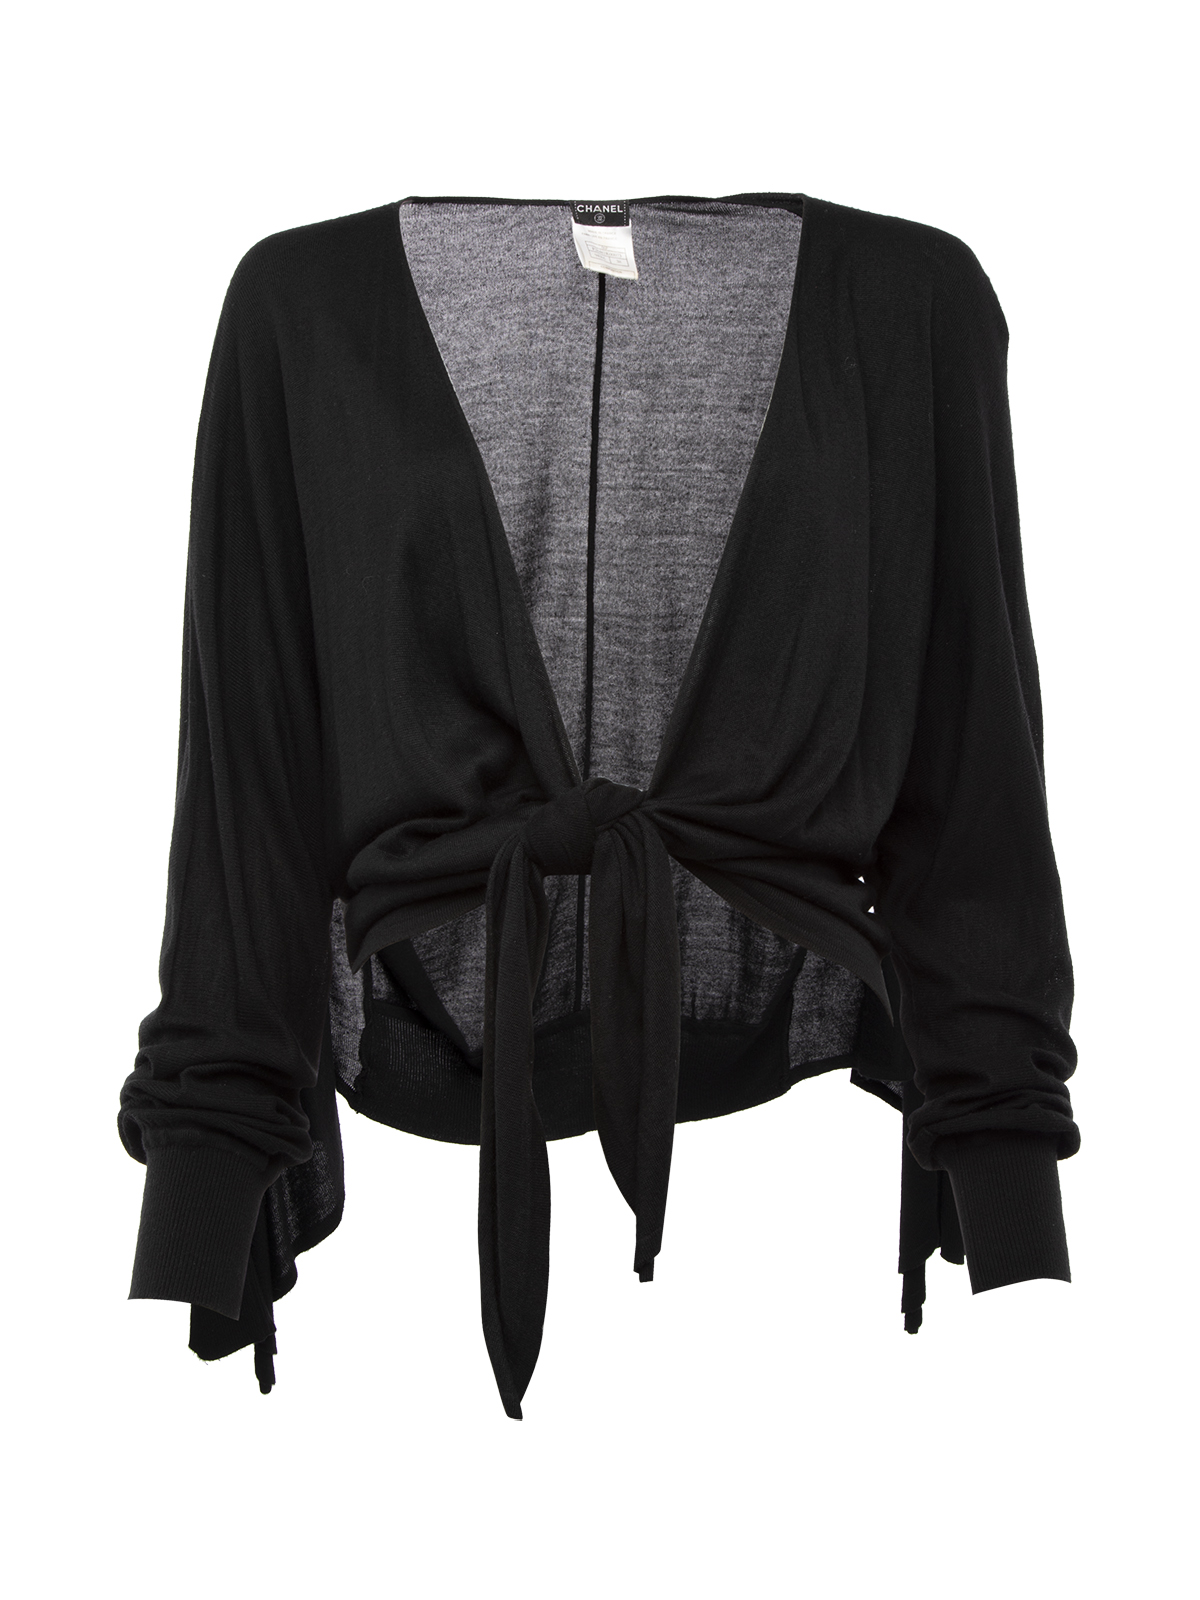 Chanel, Tie Up Waterfall Cardigan, Black, Cashmere